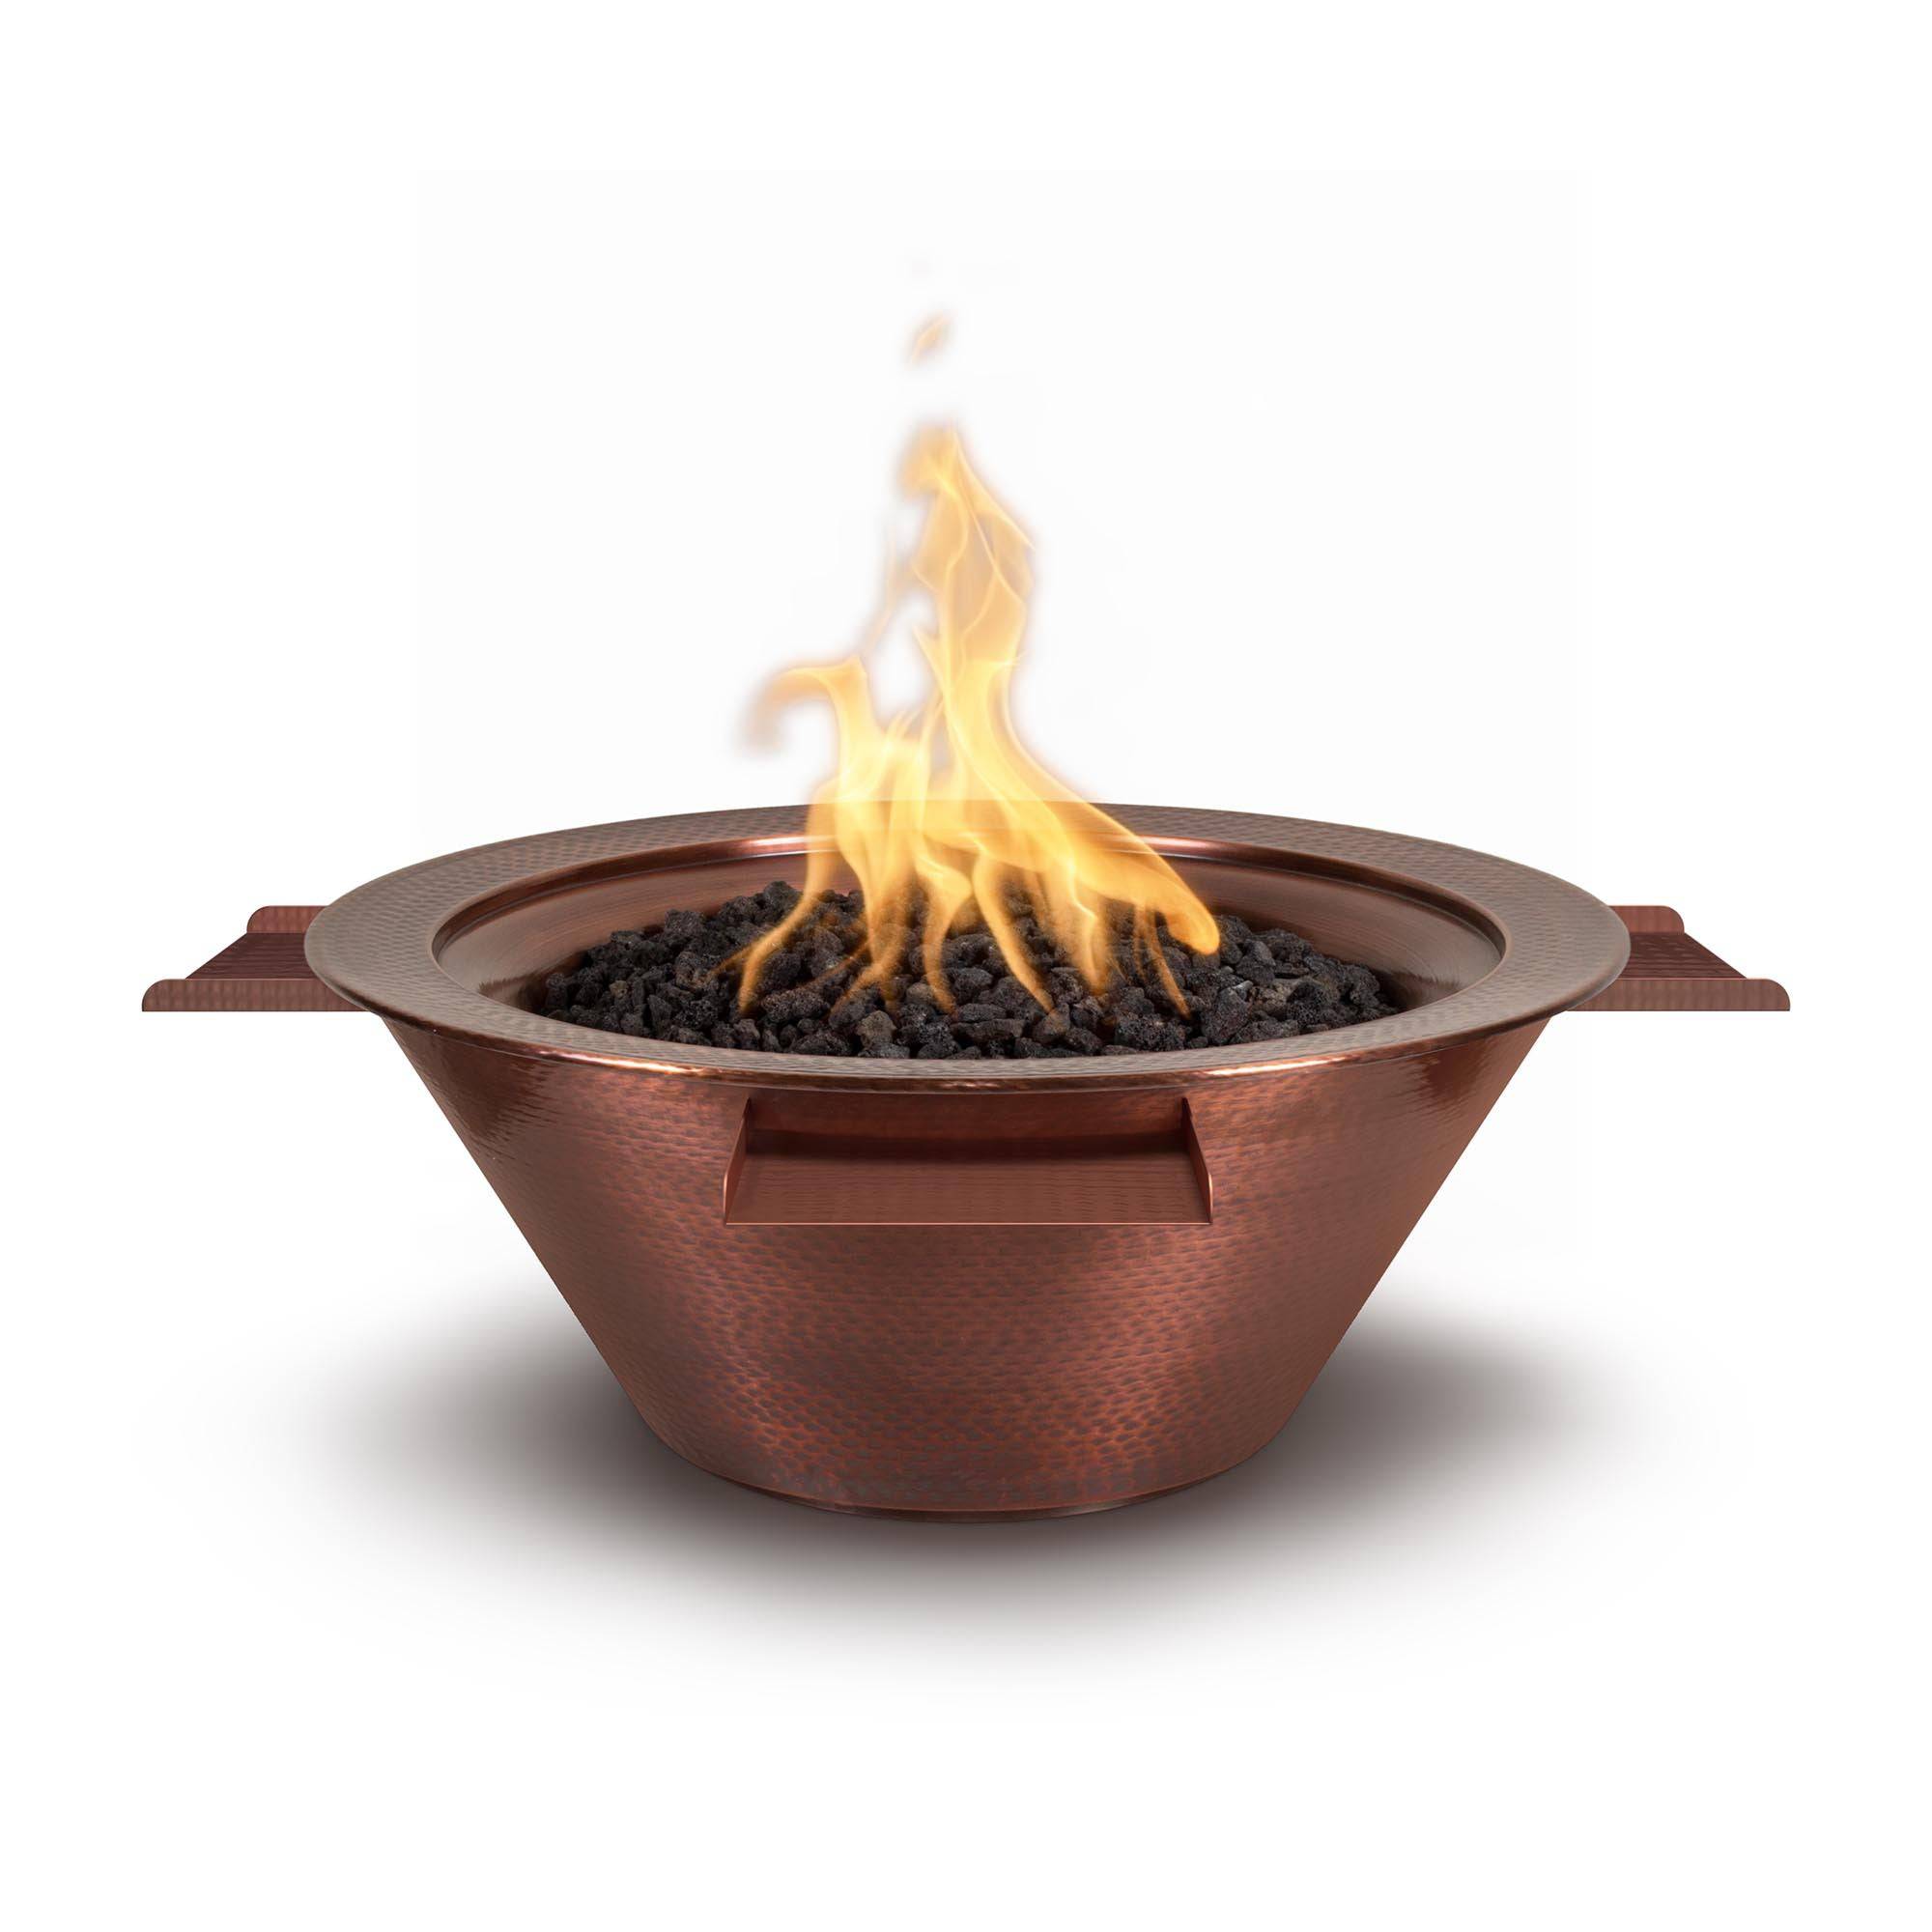 The Outdoor Plus Cazo Fire & Water Bowl 4-Way Spill Copper OPT-4WXX - Serenity Provision